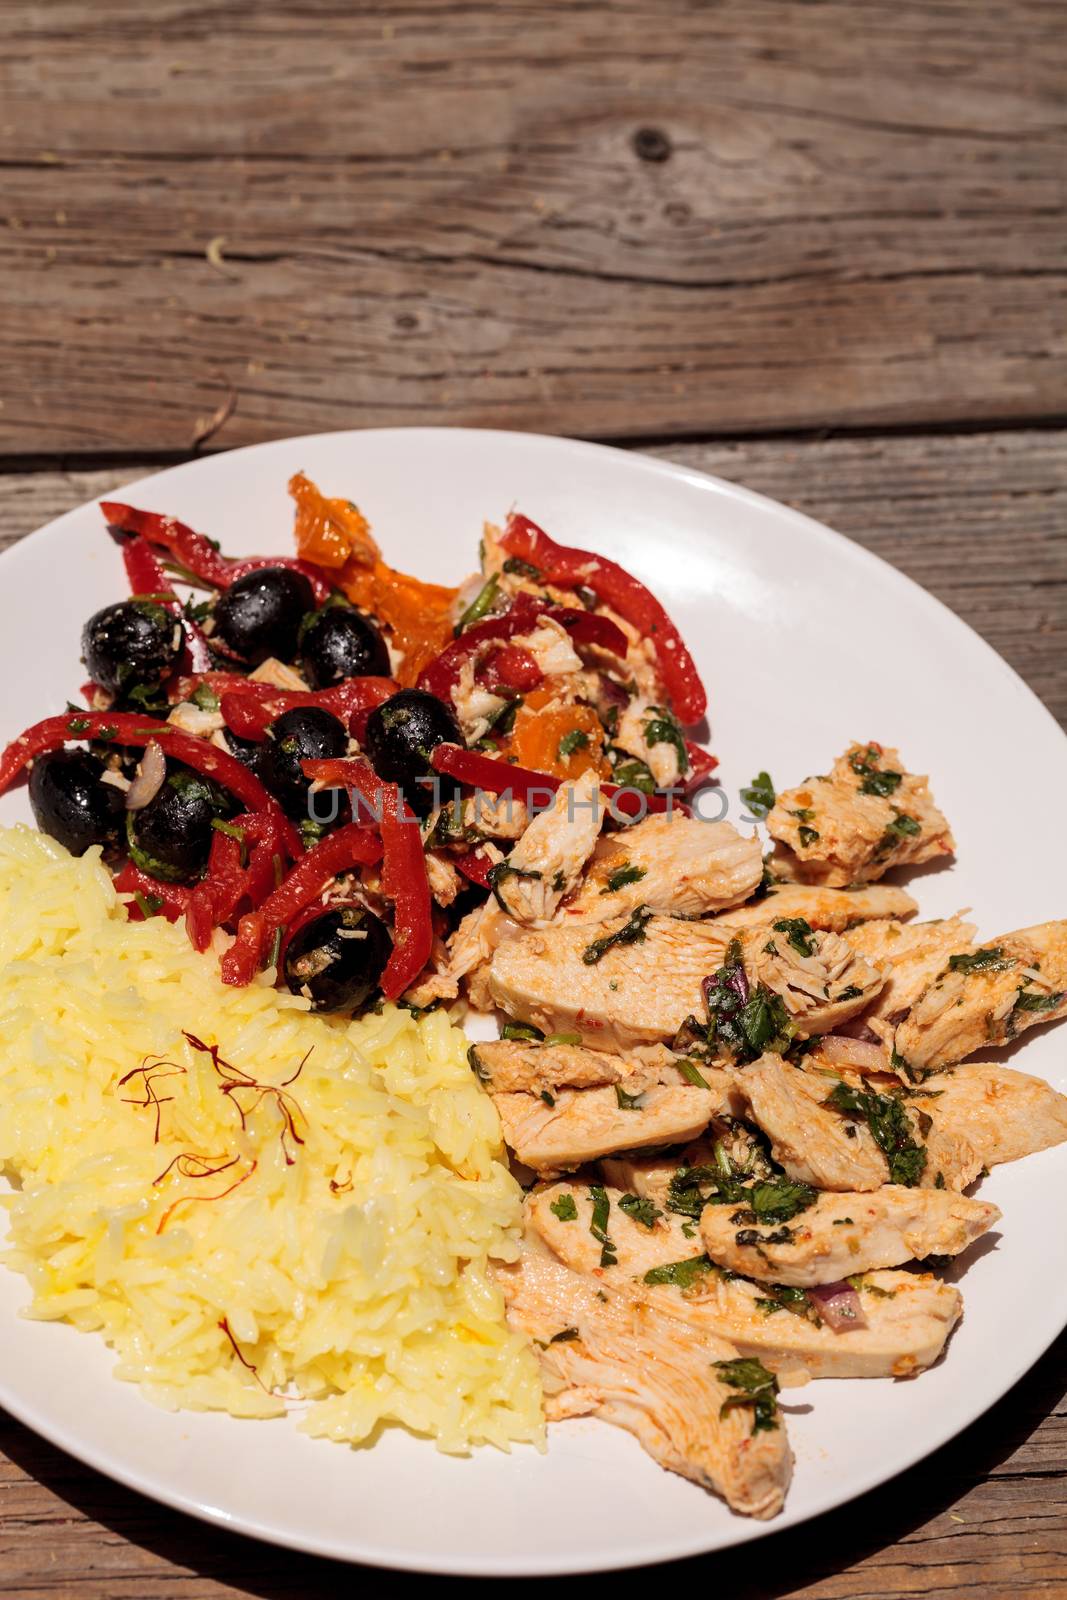 Spicy Chicken Diablo with cilantro, olives, peppers, garlic and onion served over saffron yellow rice.